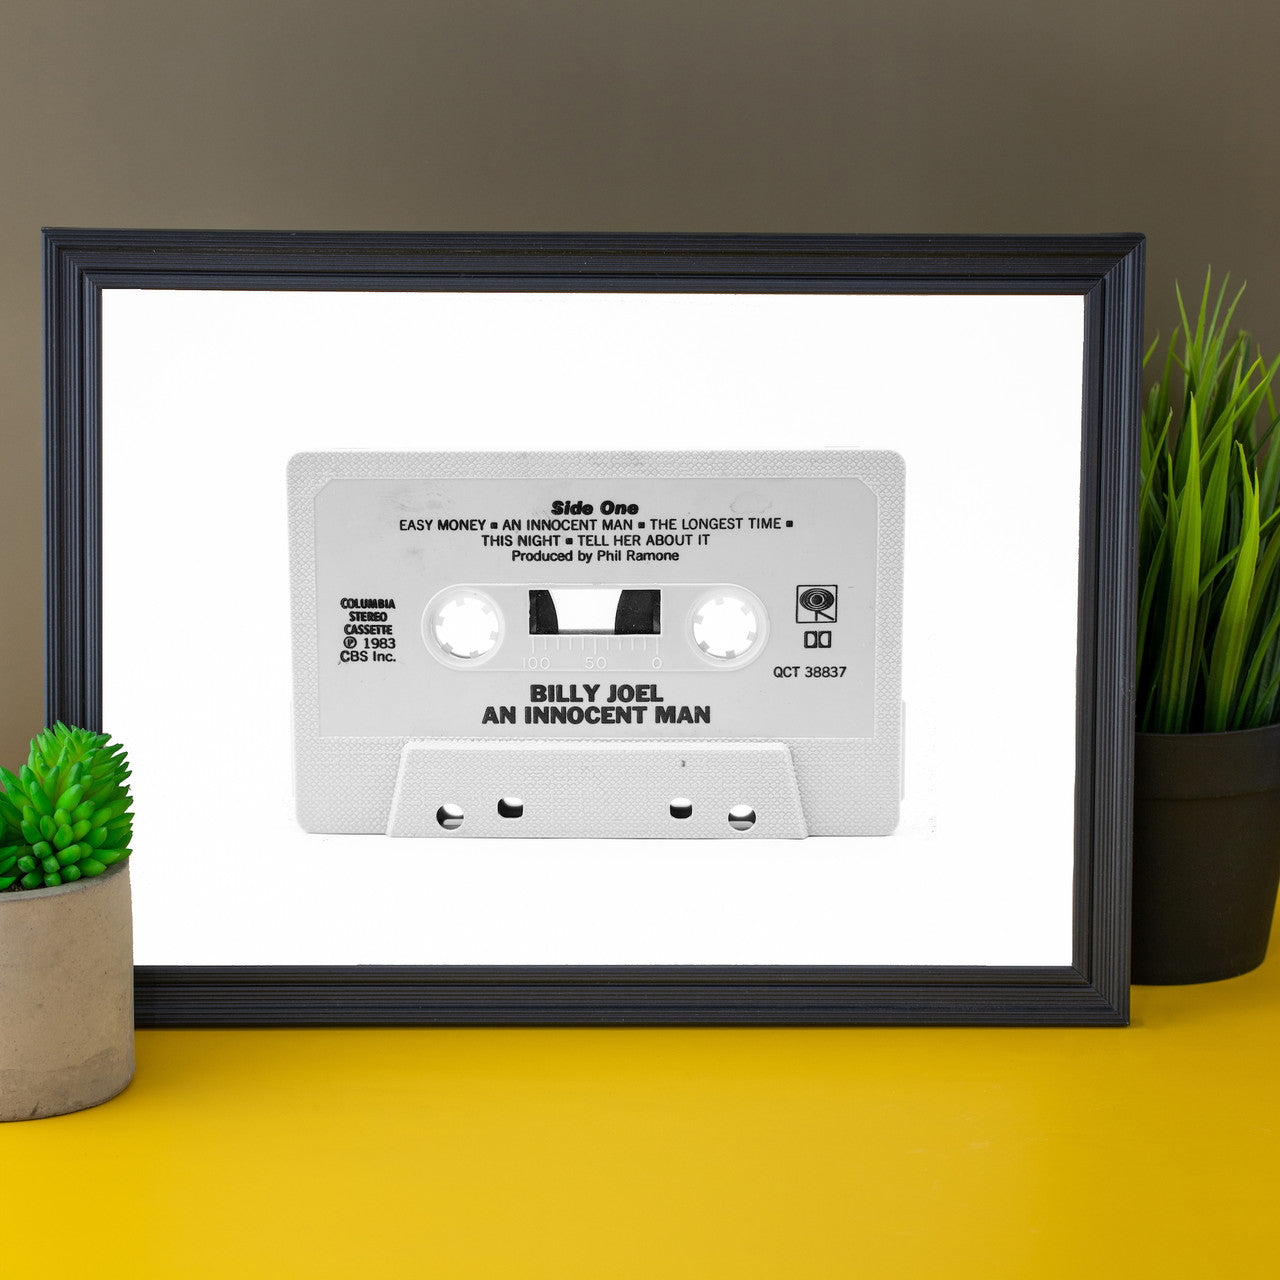 Modern art photo of the cassette of "Billy Joel An Innocent Man" displayed in your office